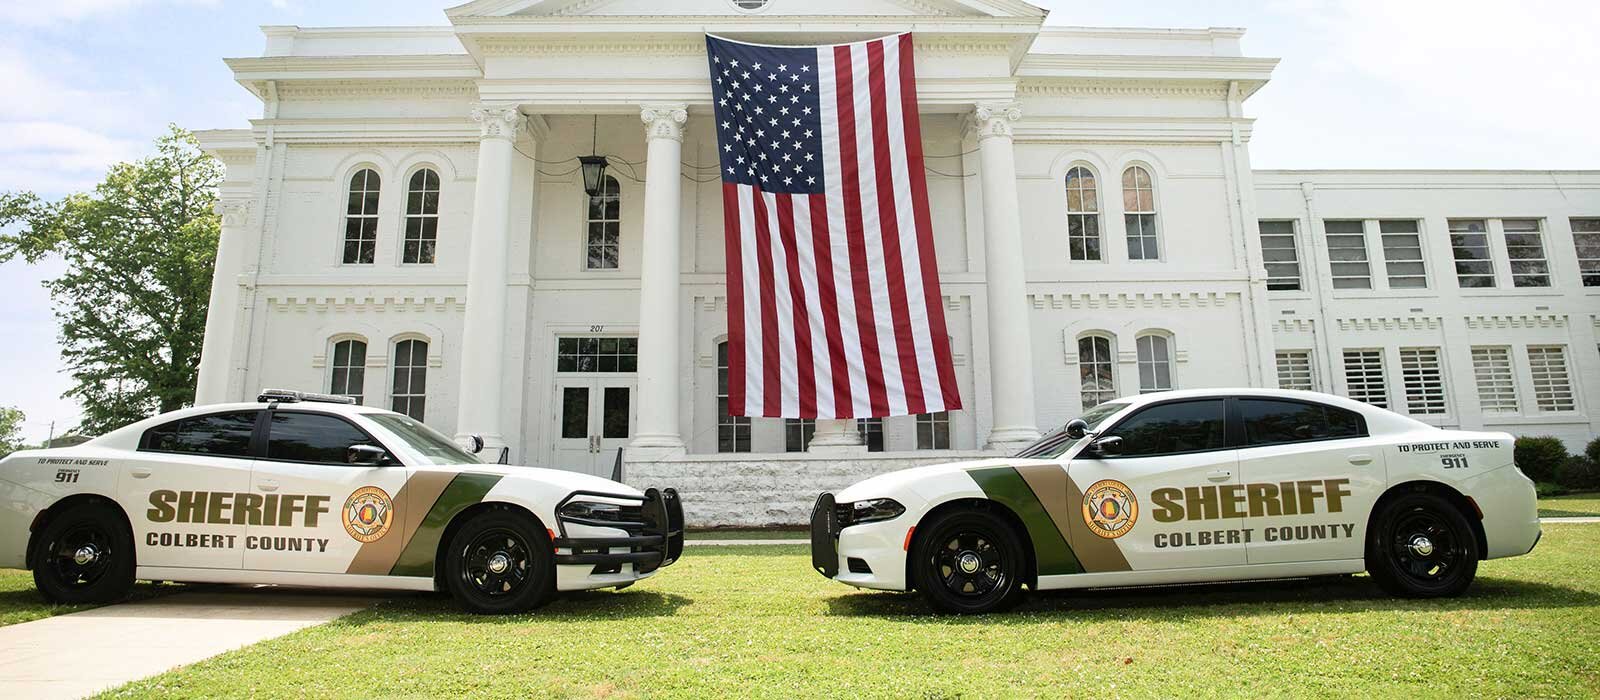 Colbert County Sheriff Patrol Vehicles in front of the Courthouse.